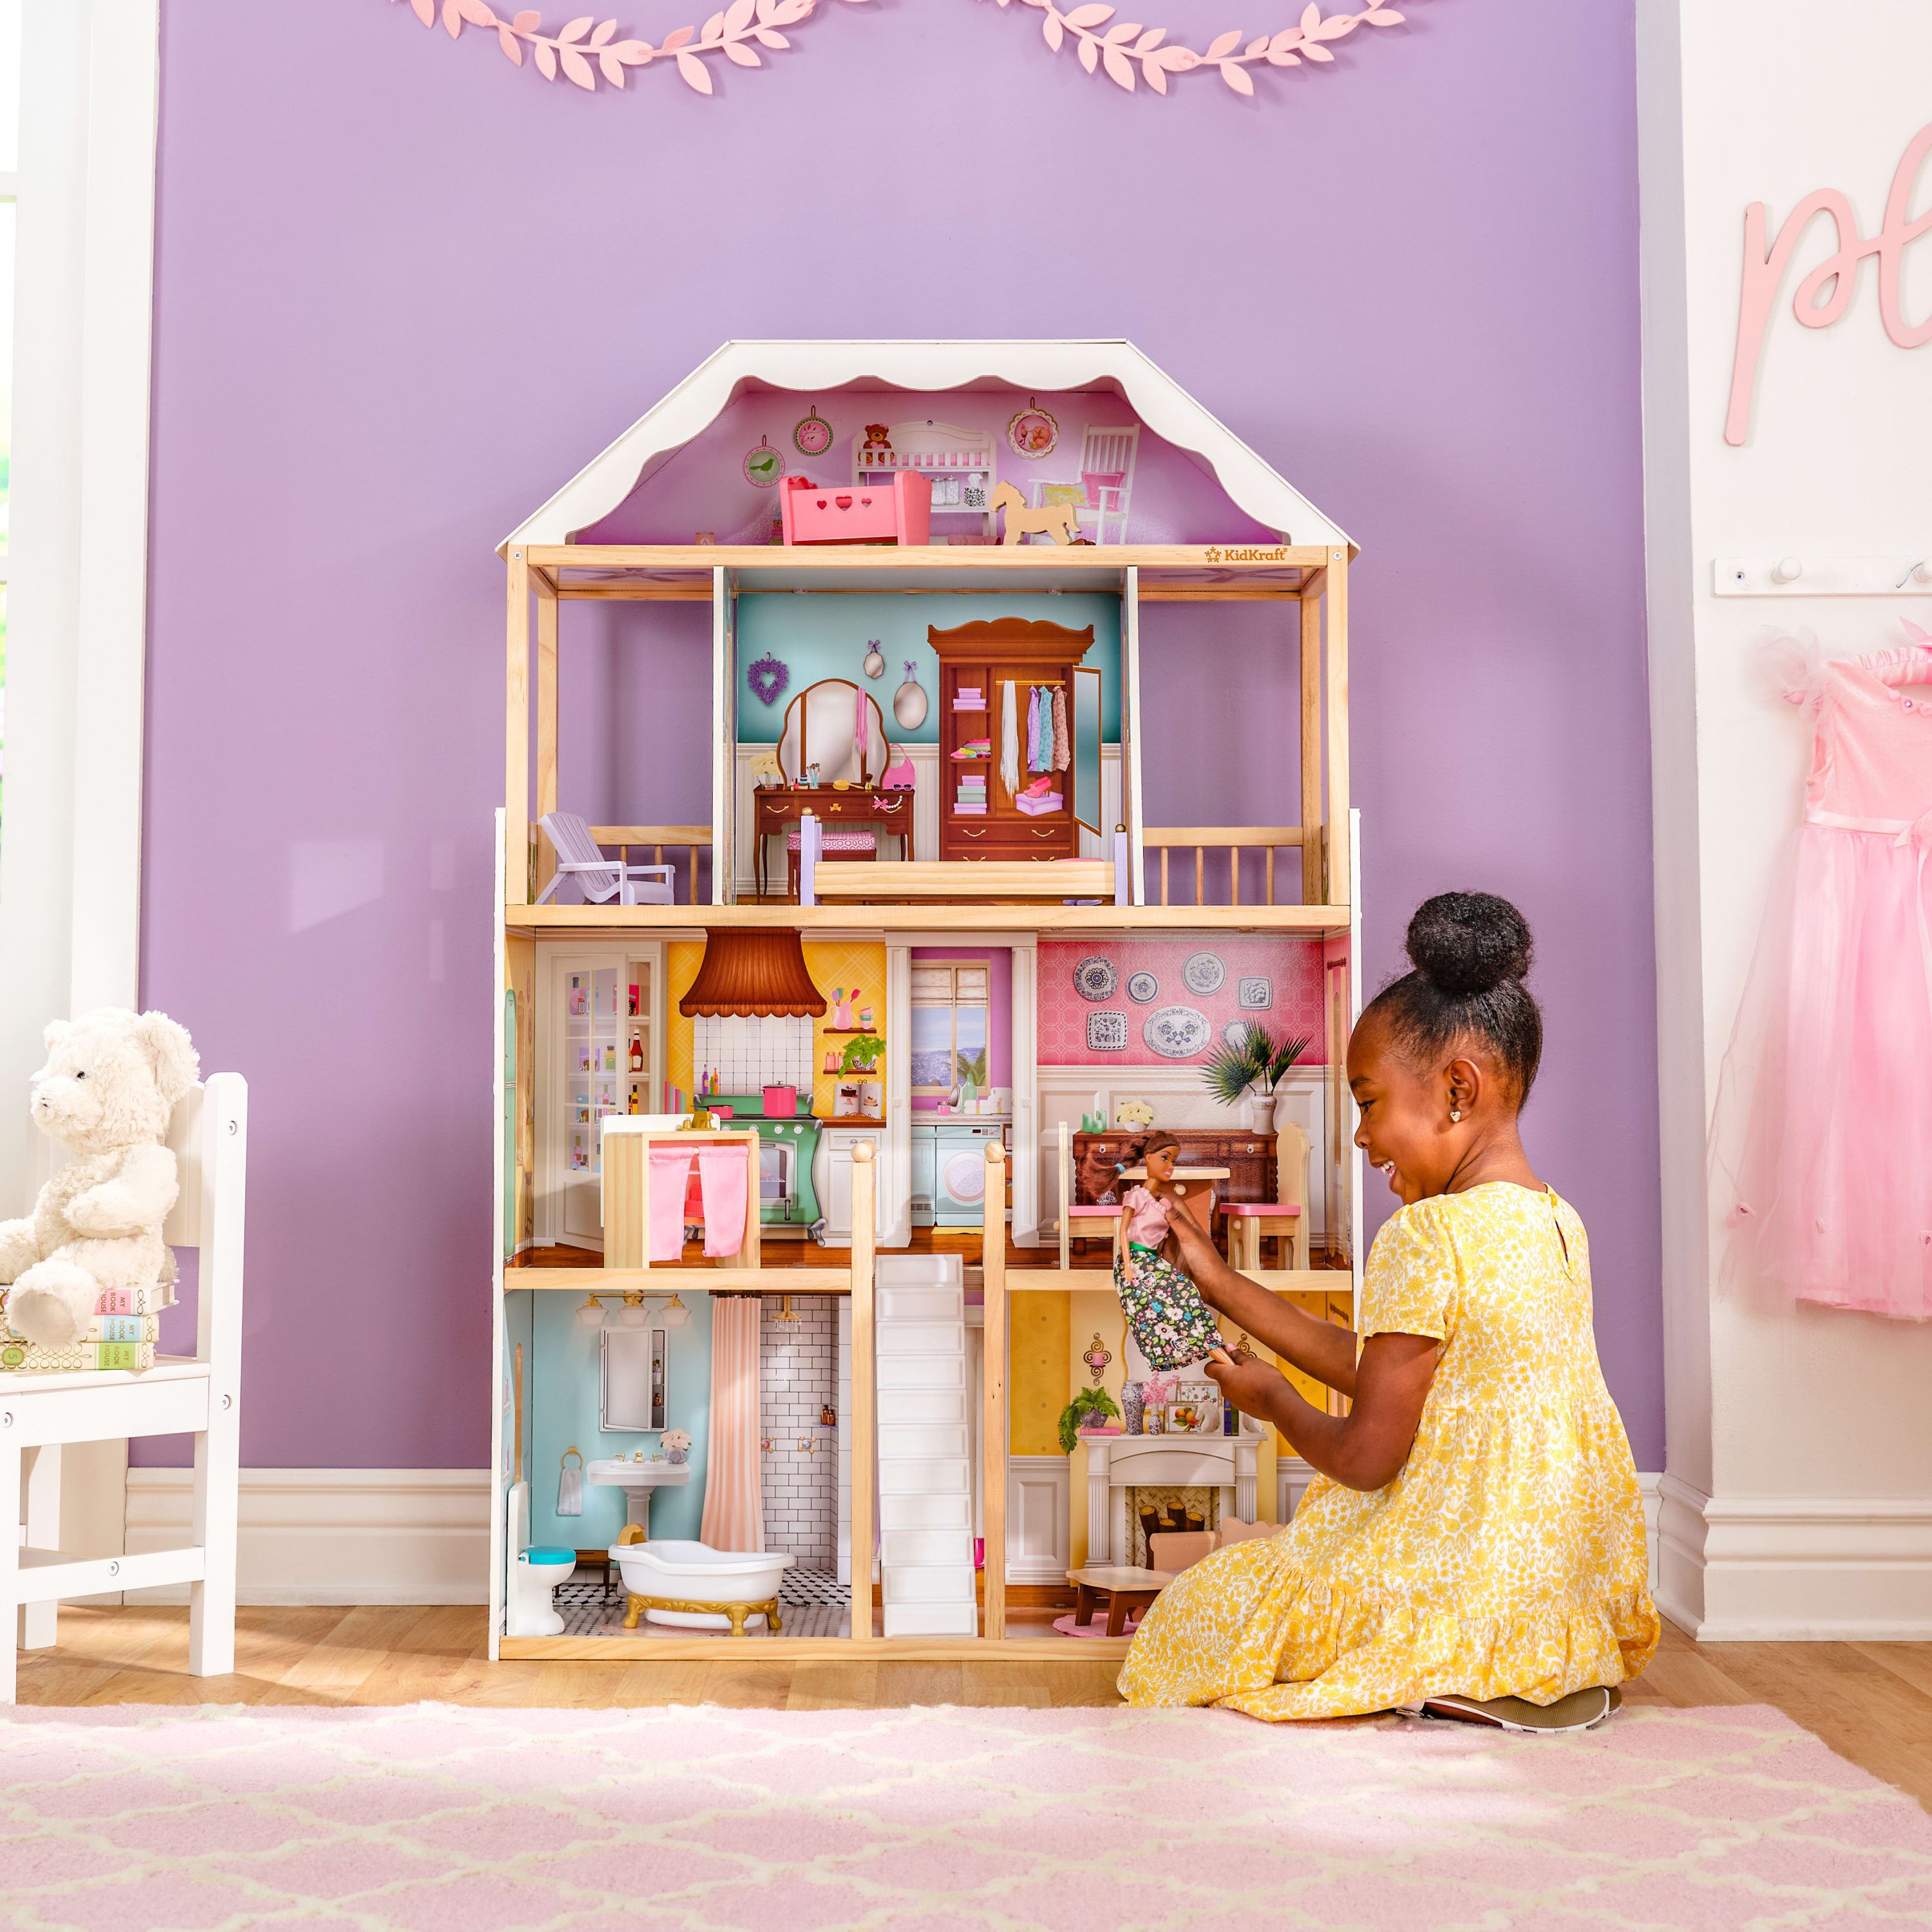 KidKraft Charlotte Classic Wooden Dollhouse with 14 Accessories 